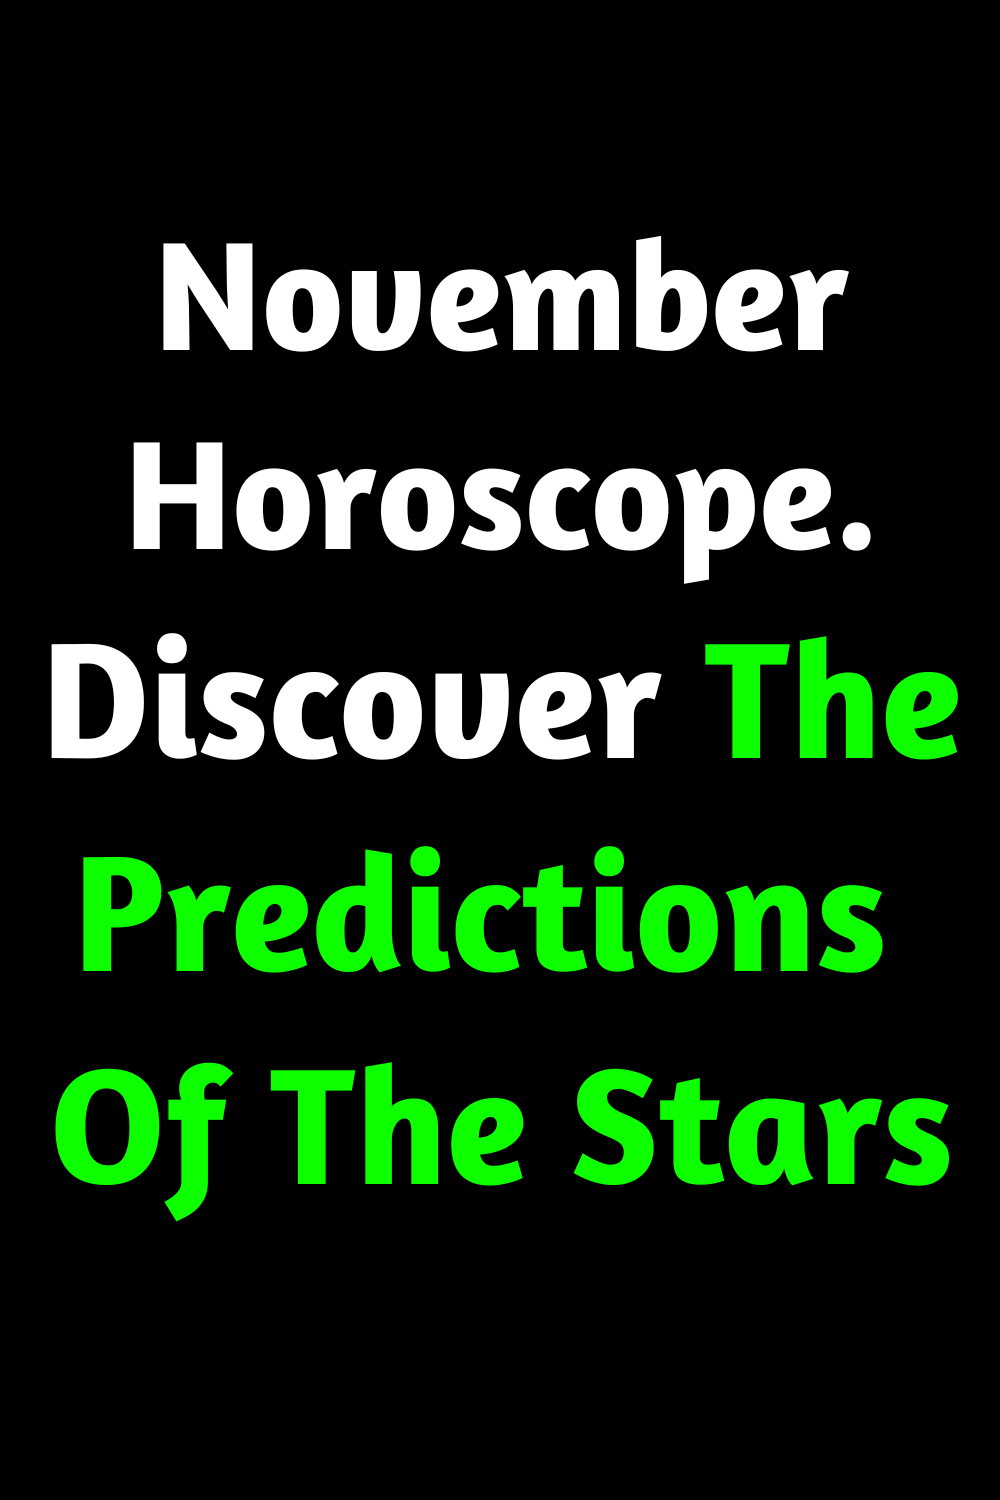 November Horoscope. Discover The Predictions Of The Stars For Your Sign